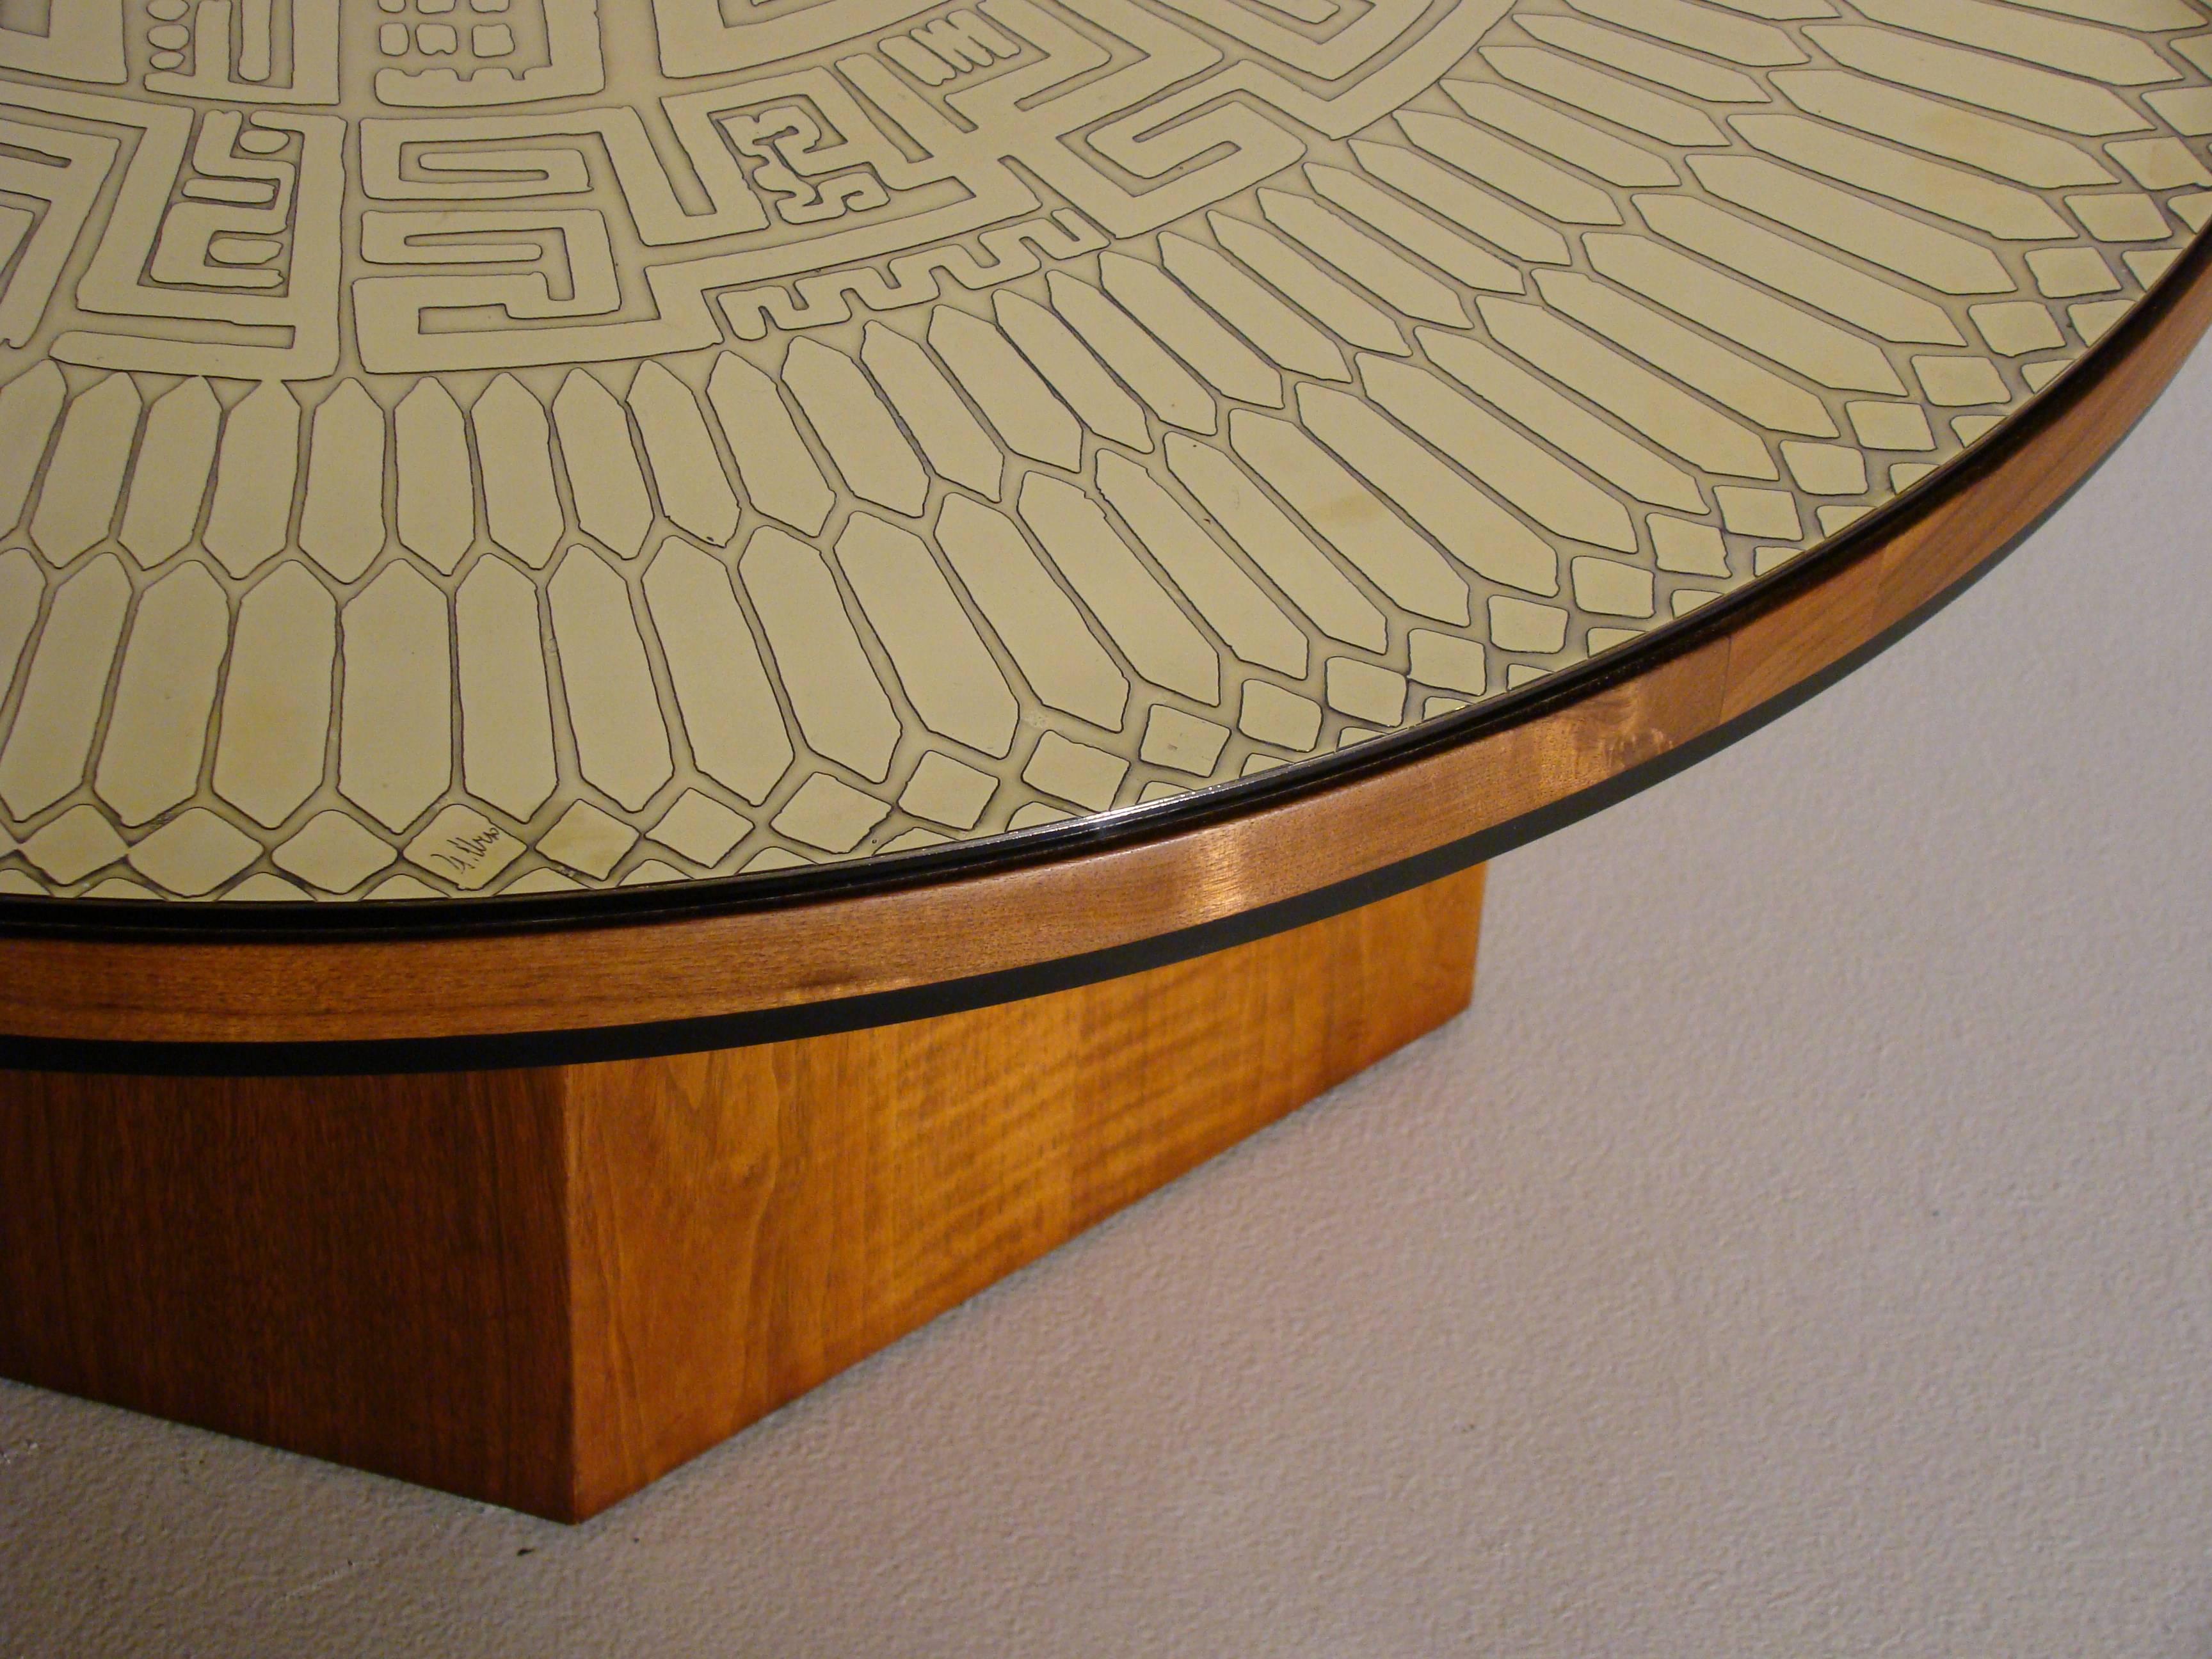 Custom built, highly polished etched coffee table with octagonal walnut base by Fred Kemp. Kemp was a leading figure in the St. Louis architectural scene for over 50 years. He designed and built custom homes with superb quality and craftsmanship in